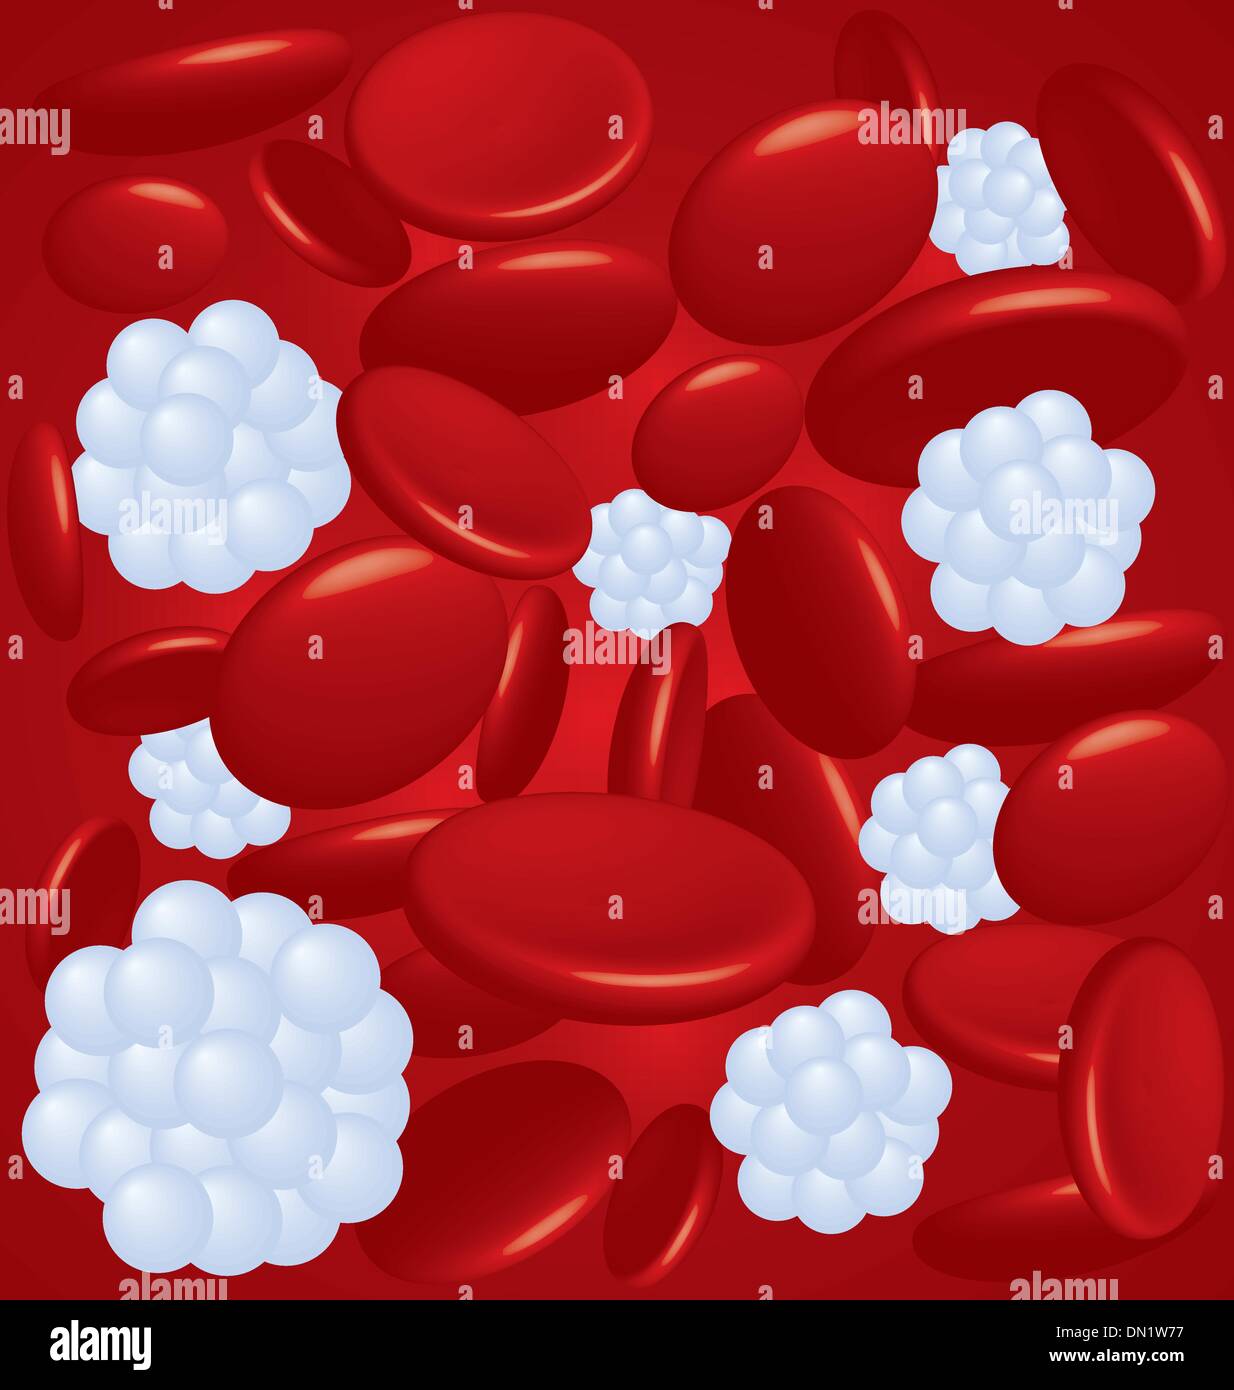 Blood cell types vector Stock Vector